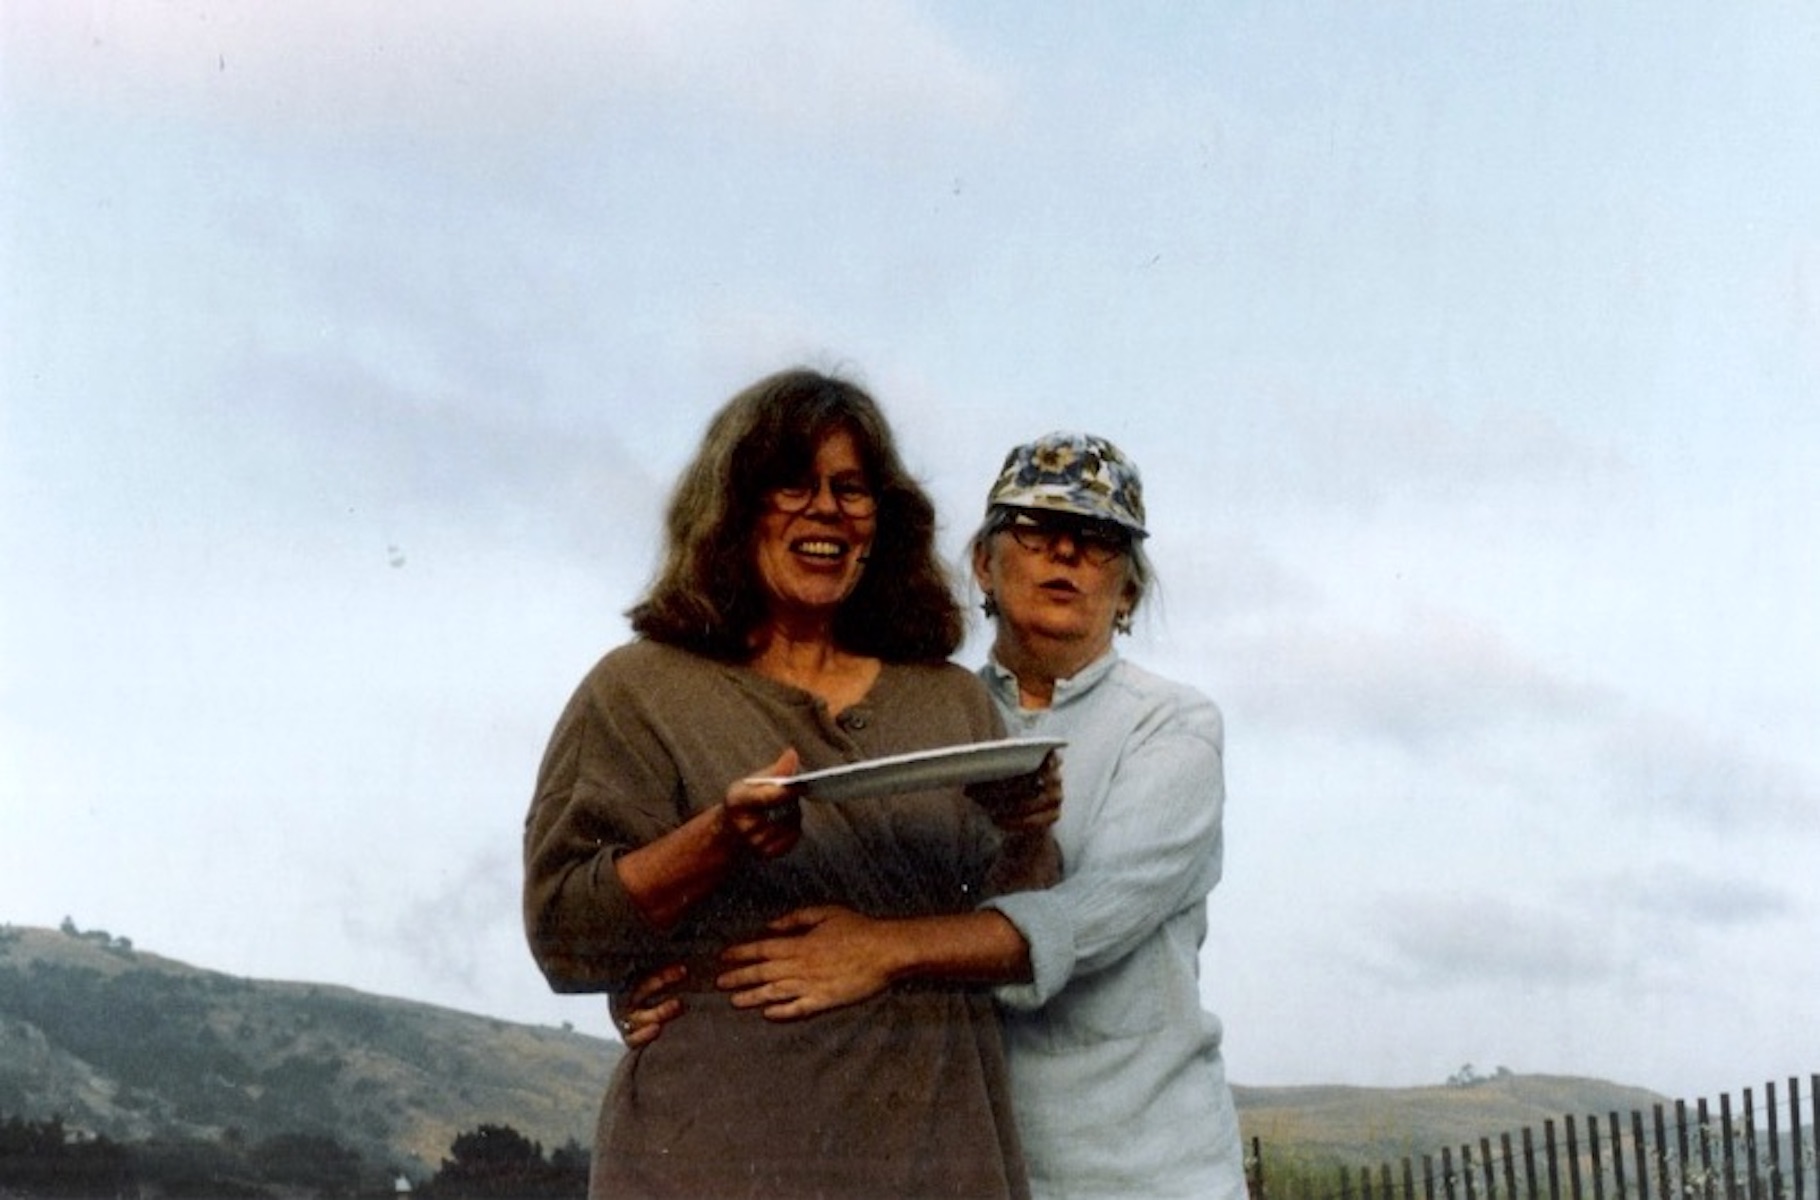 Susan with her partner Nan, 1990s. Photo courtesy of Susan Griffin.